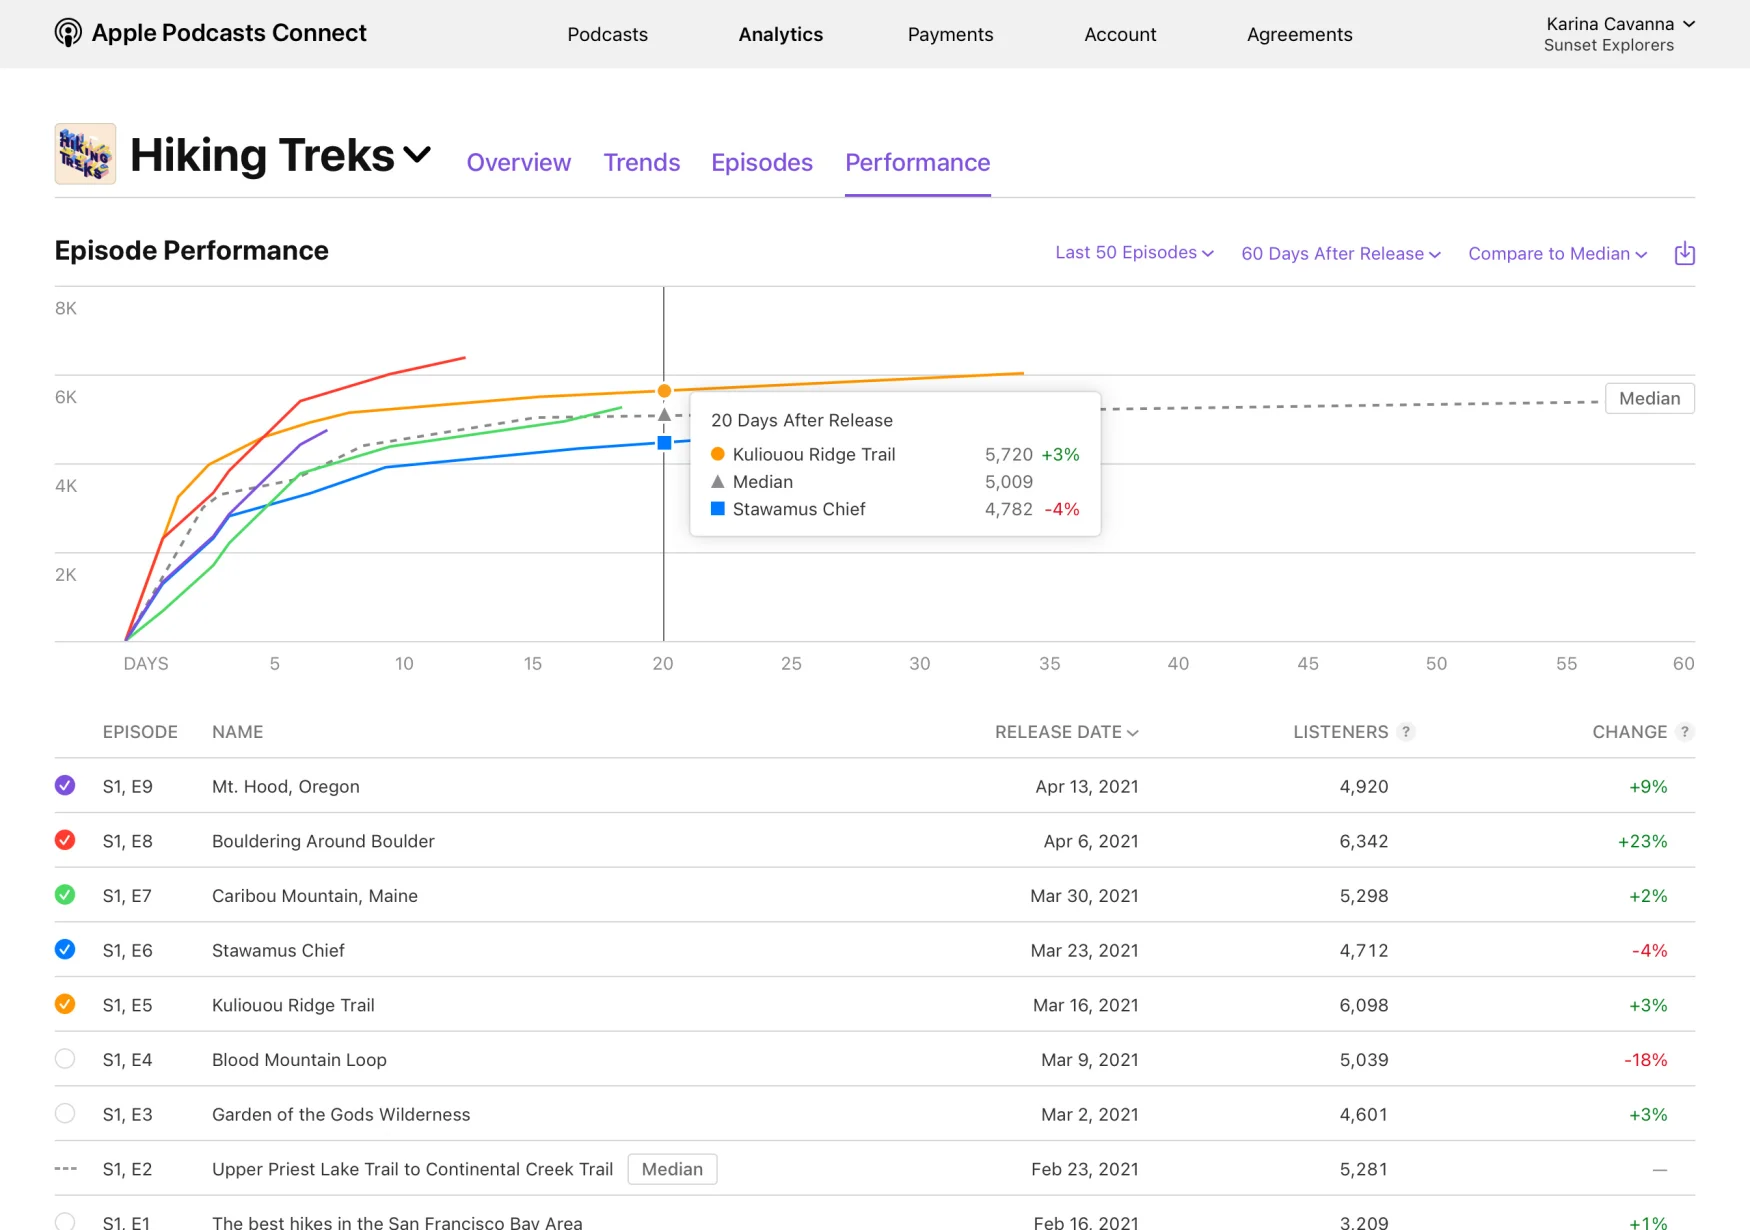 Apple will offer analytics as part of its $19.99/year Apple Podcasters Program.